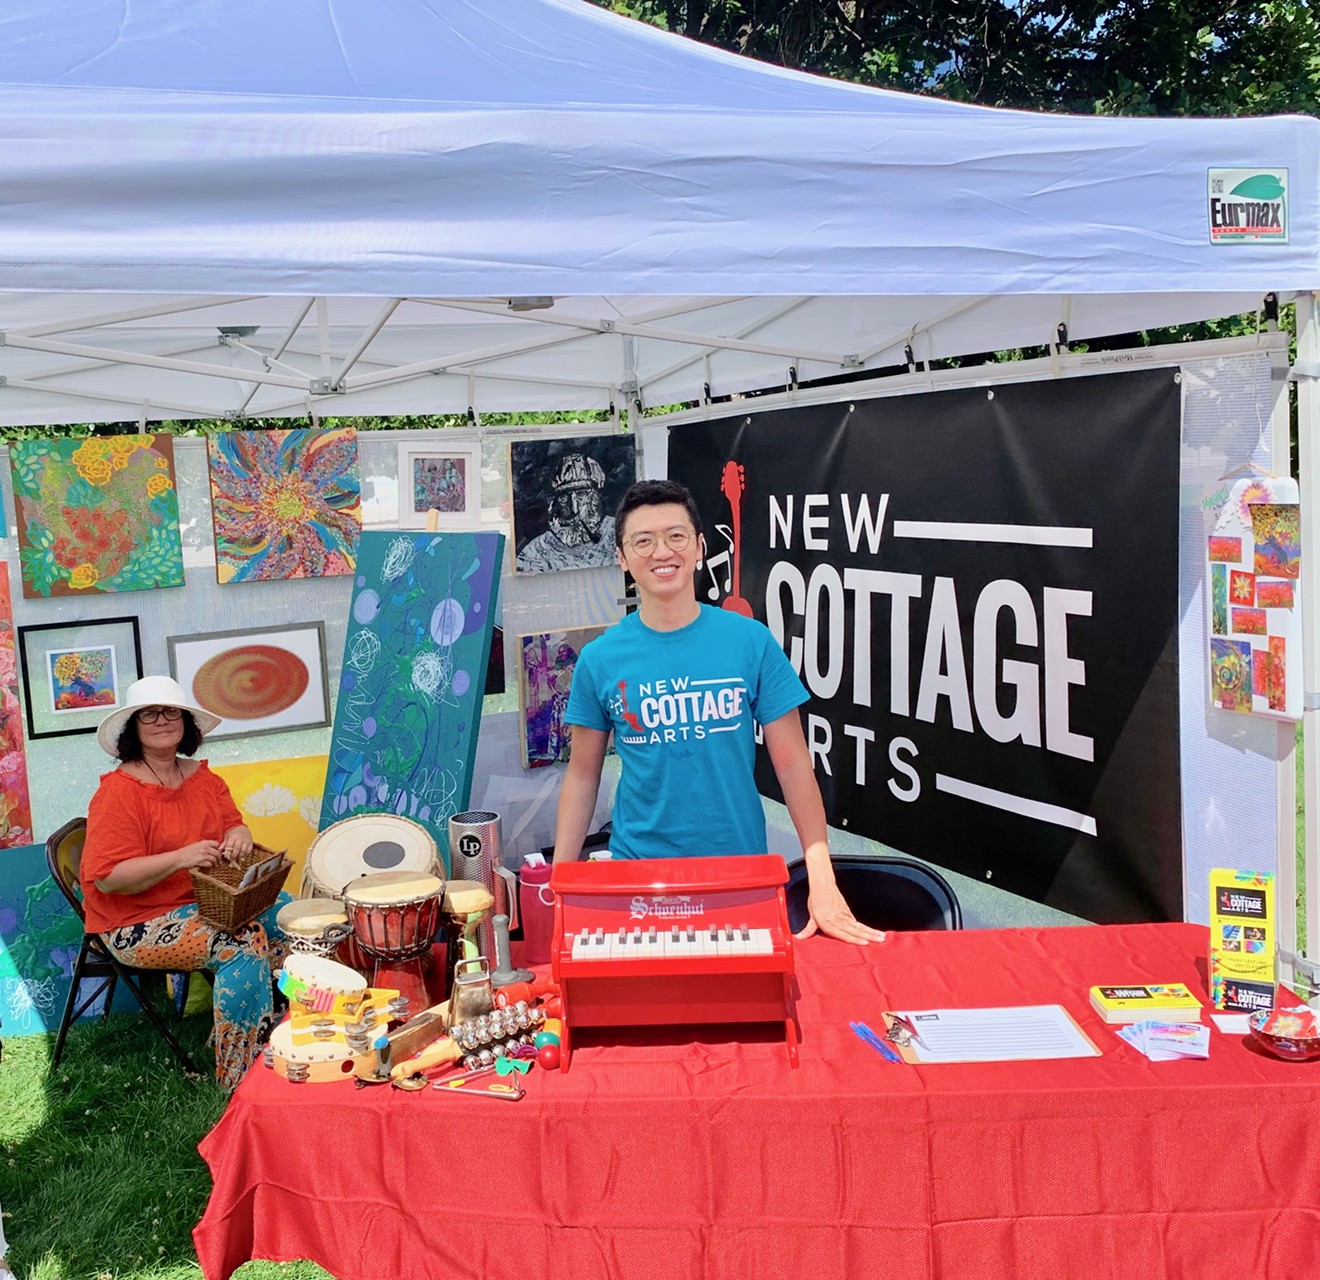 New Cottage Arts held a booth at the Denver International Festival.